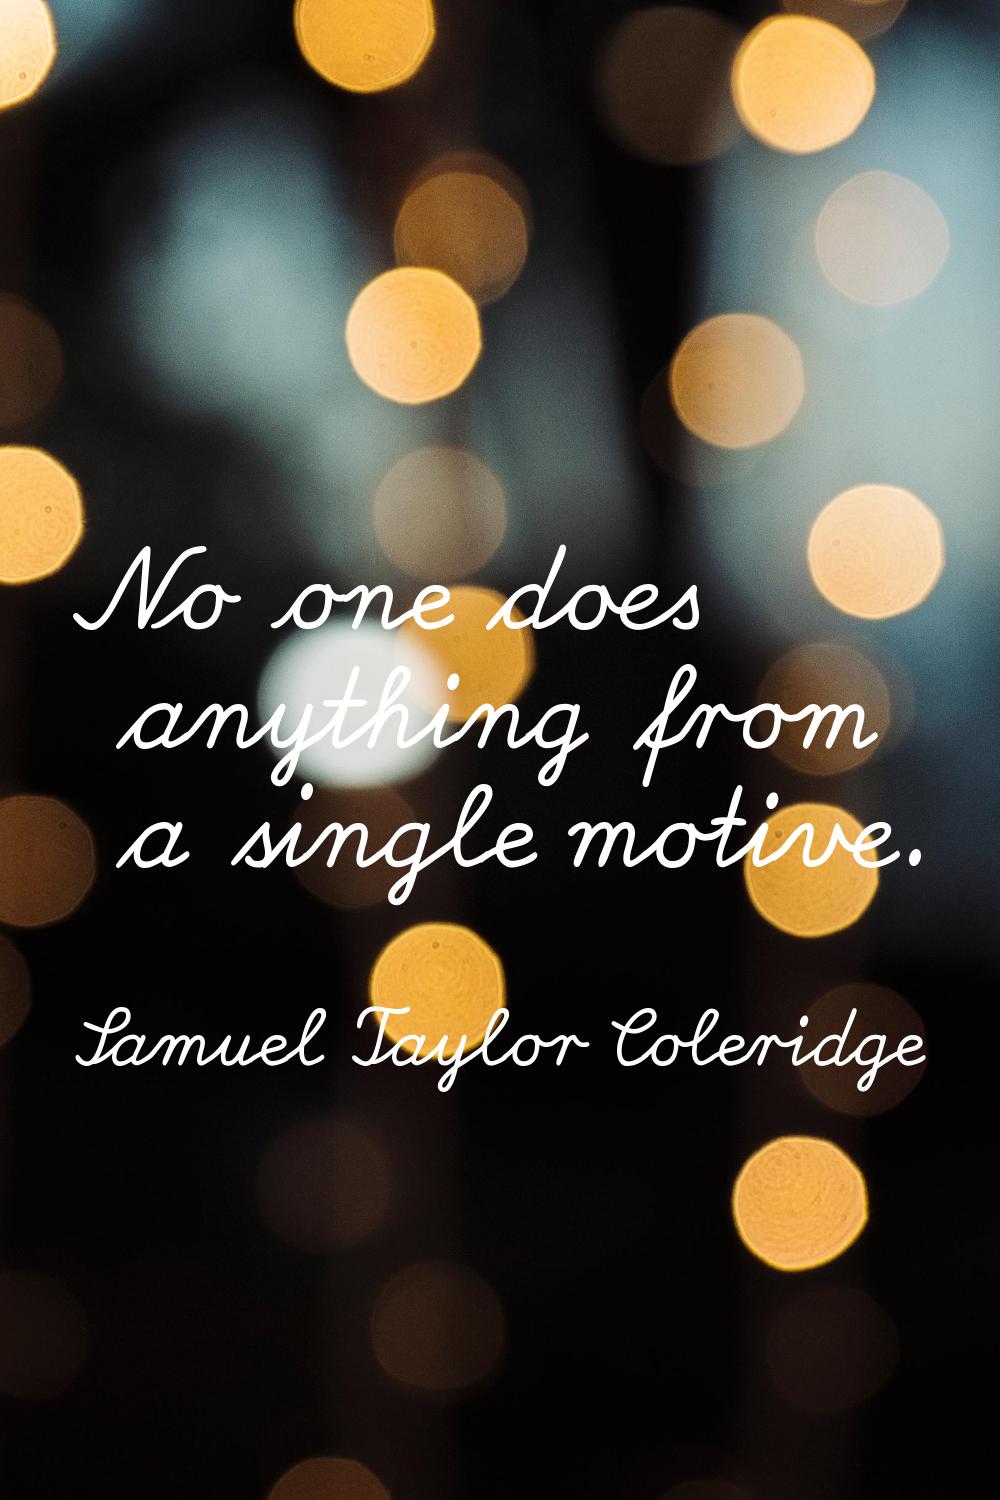 No one does anything from a single motive.